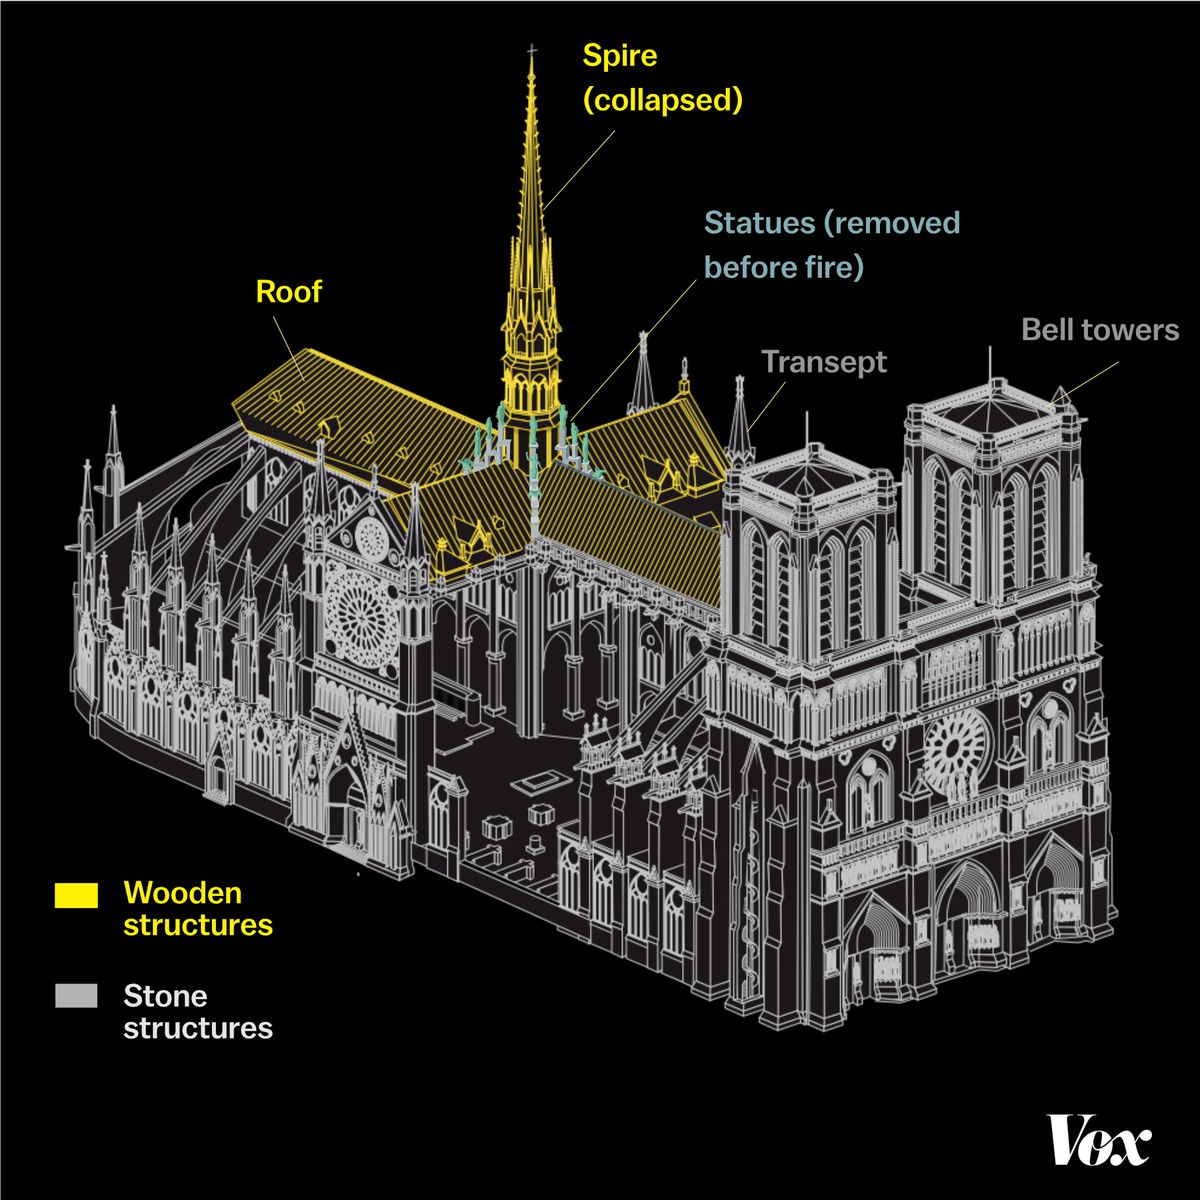 A diagram of the location of the wooden structural elements that caught on fire this week in the Notre Dame Cathedral in Paris, France.